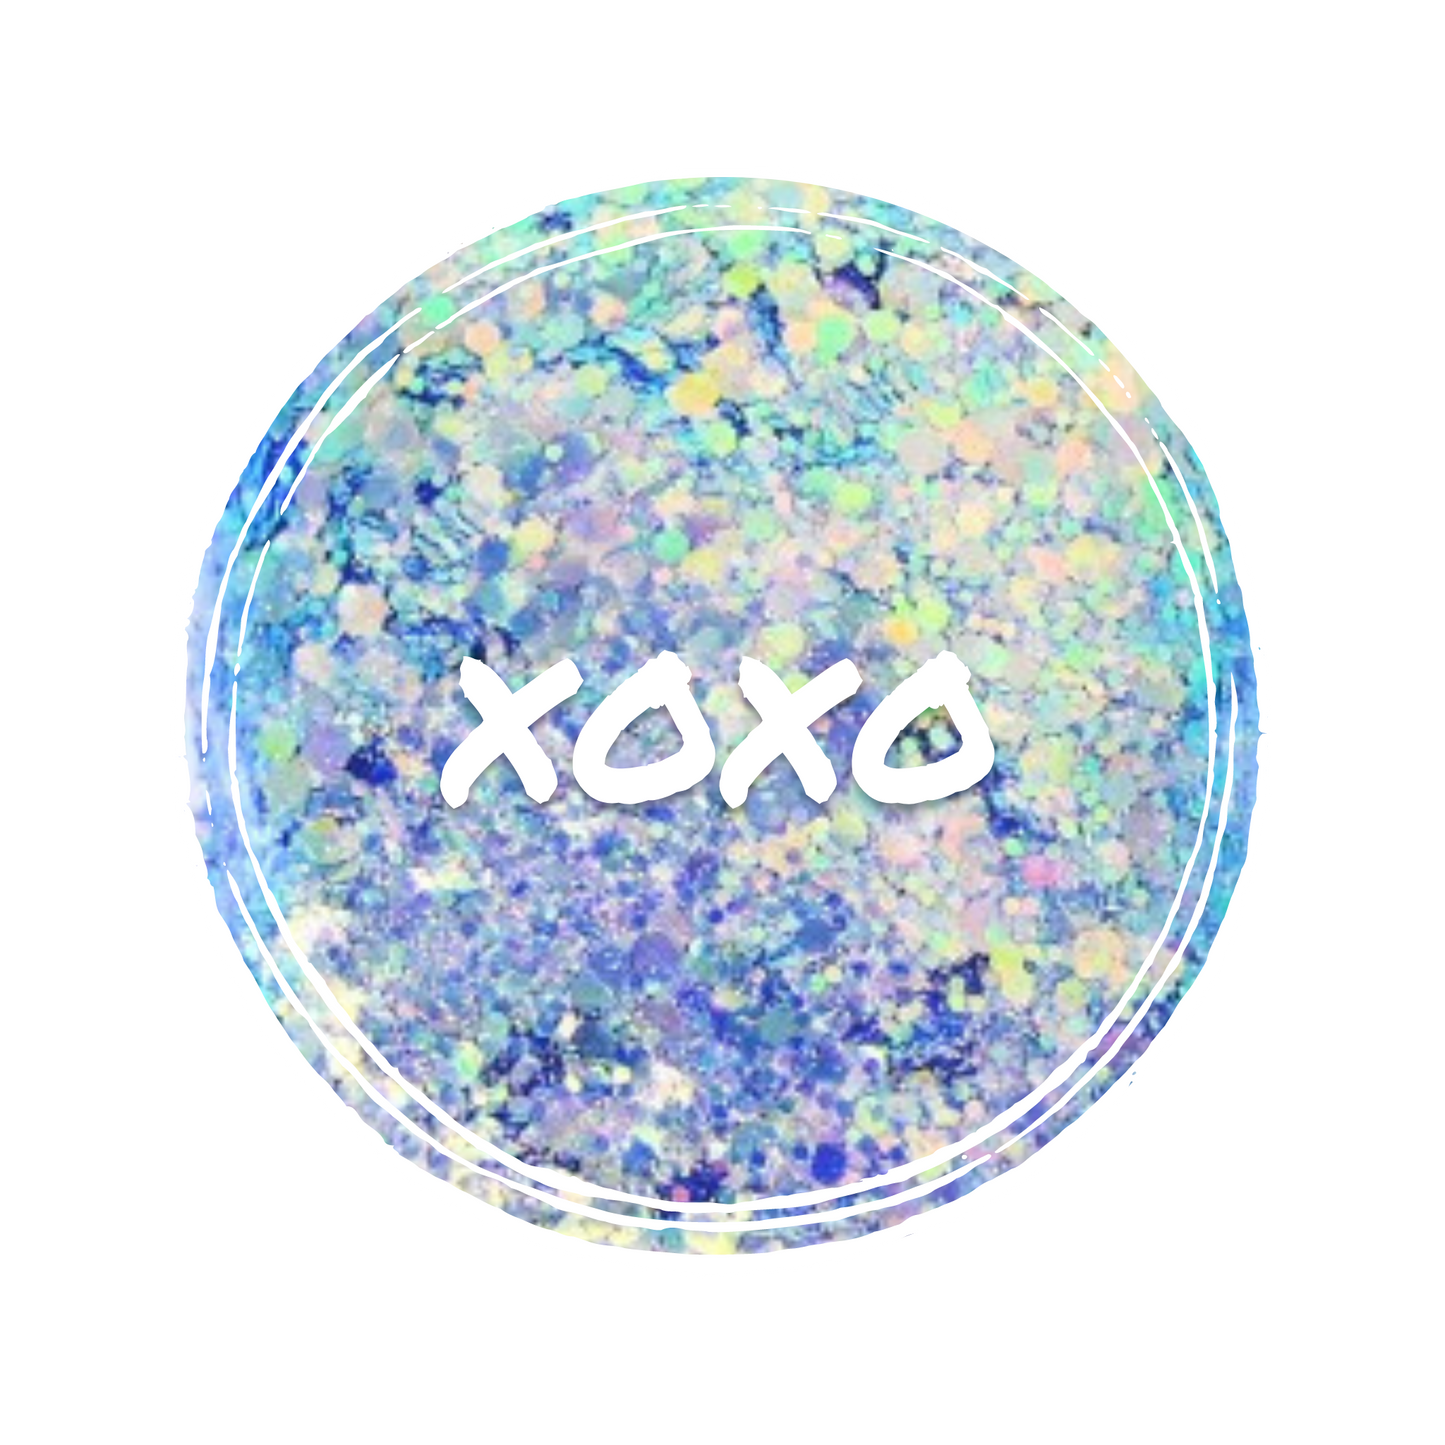 XOXO - Limited Edition